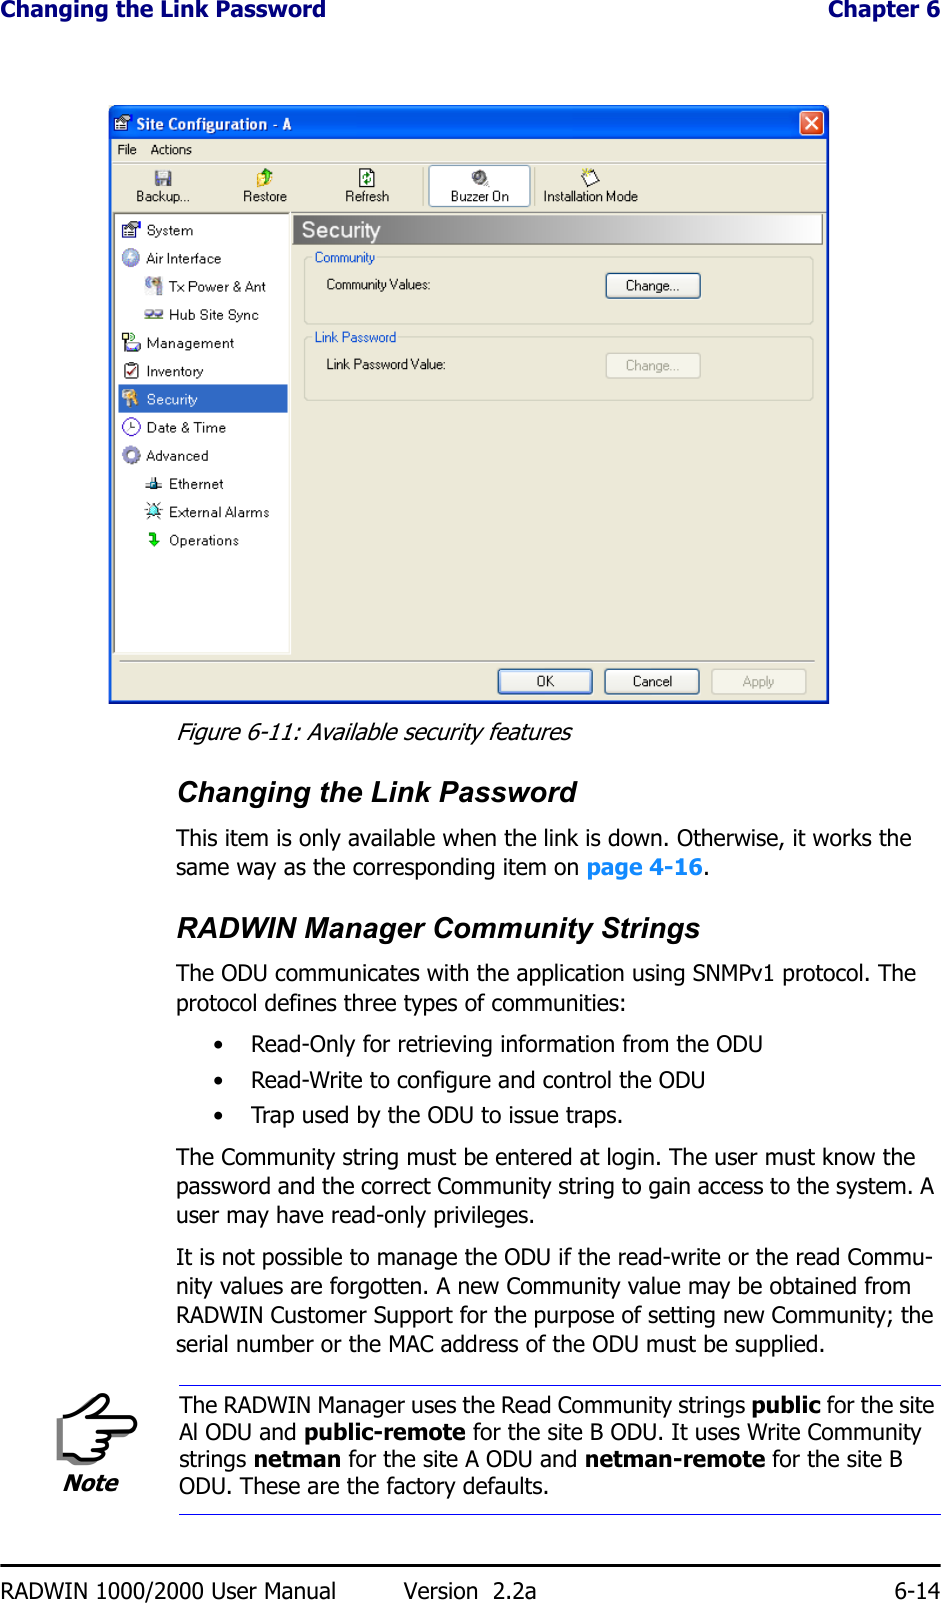 Changing the Link Password  Chapter 6RADWIN 1000/2000 User Manual Version  2.2a 6-14 Figure 6-11: Available security featuresChanging the Link PasswordThis item is only available when the link is down. Otherwise, it works the same way as the corresponding item on page 4-16.RADWIN Manager Community StringsThe ODU communicates with the application using SNMPv1 protocol. The protocol defines three types of communities:• Read-Only for retrieving information from the ODU• Read-Write to configure and control the ODU• Trap used by the ODU to issue traps.The Community string must be entered at login. The user must know the password and the correct Community string to gain access to the system. A user may have read-only privileges.It is not possible to manage the ODU if the read-write or the read Commu-nity values are forgotten. A new Community value may be obtained from RADWIN Customer Support for the purpose of setting new Community; the serial number or the MAC address of the ODU must be supplied.NoteThe RADWIN Manager uses the Read Community strings public for the site Al ODU and public-remote for the site B ODU. It uses Write Community strings netman for the site A ODU and netman-remote for the site B ODU. These are the factory defaults.